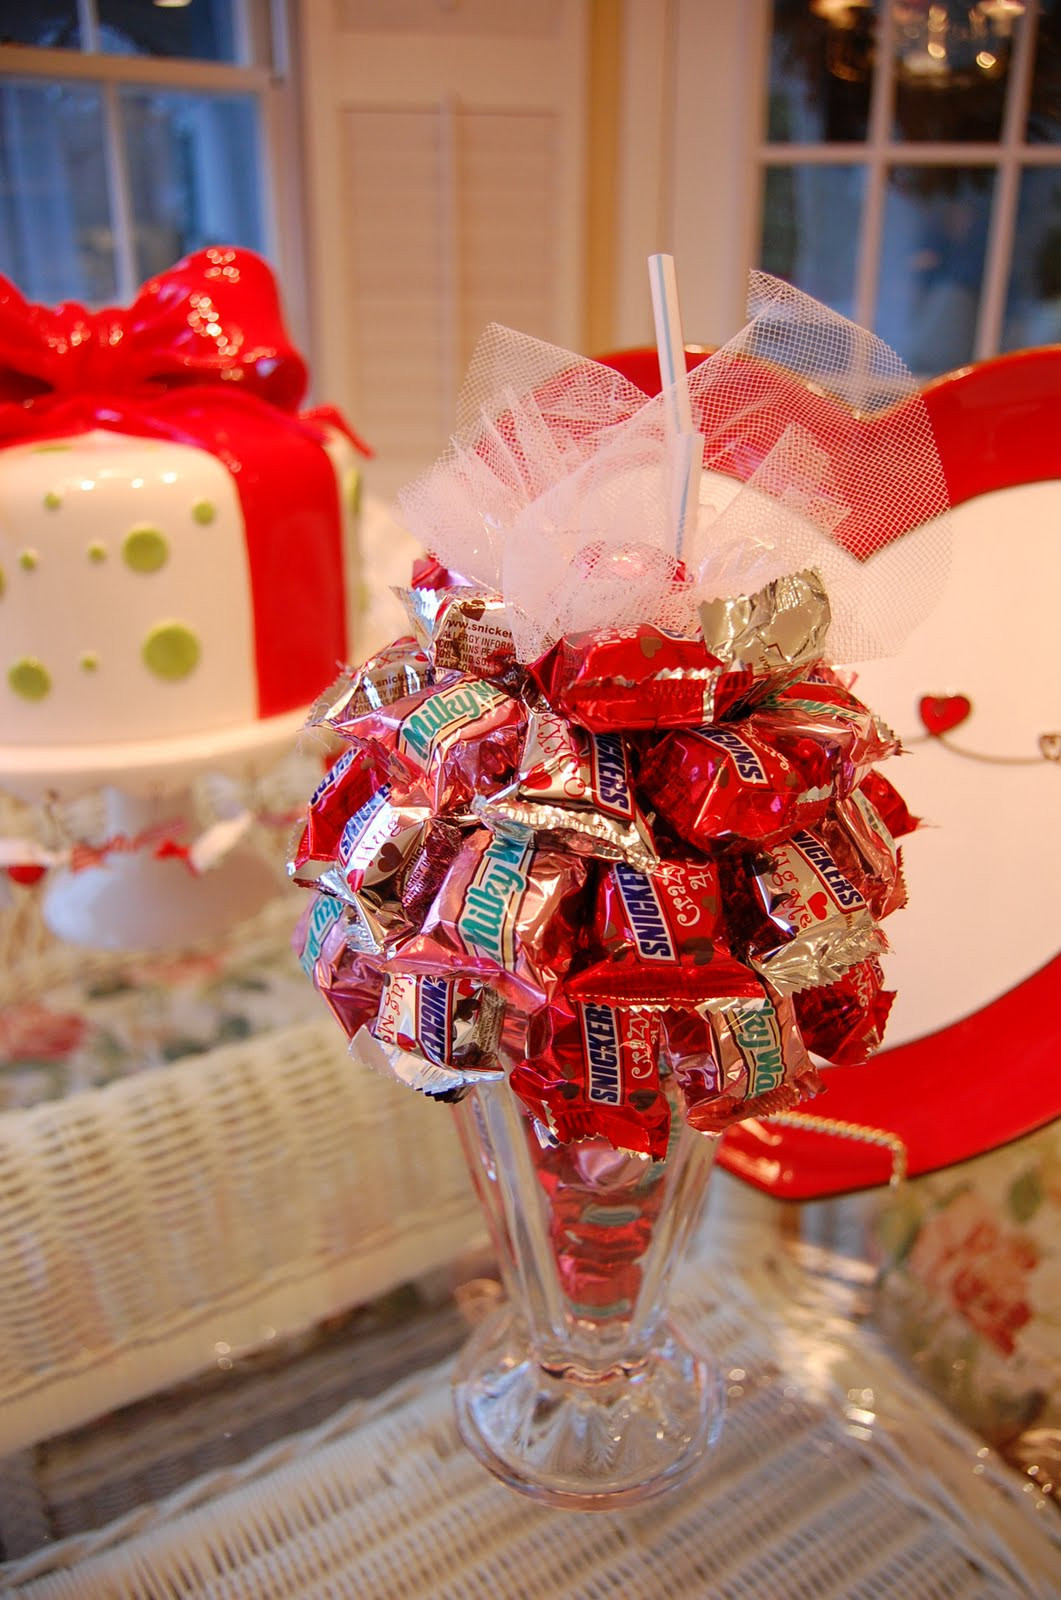 Valentines Day Candy Gift Ideas
 Valentine’s Day Craft and Gift